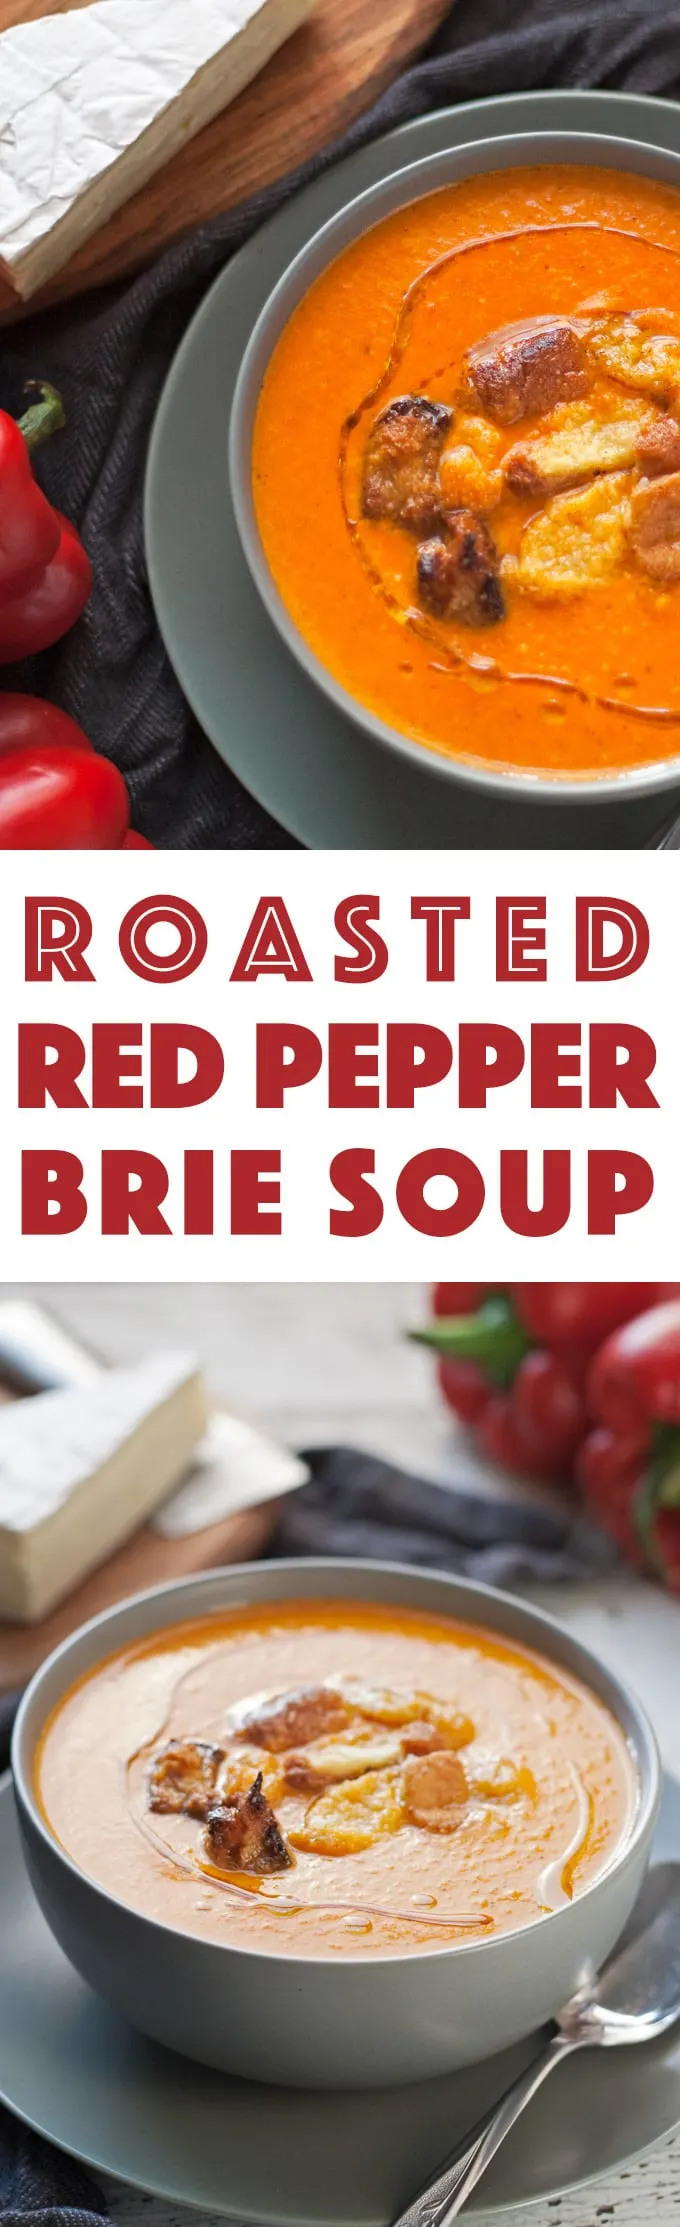 This roasted red pepper brie soup is creamy and smooth. Serve it with homemade croutons or crusty bread and a salad for the perfect cool-weather lunch! | honeyandbirch.com